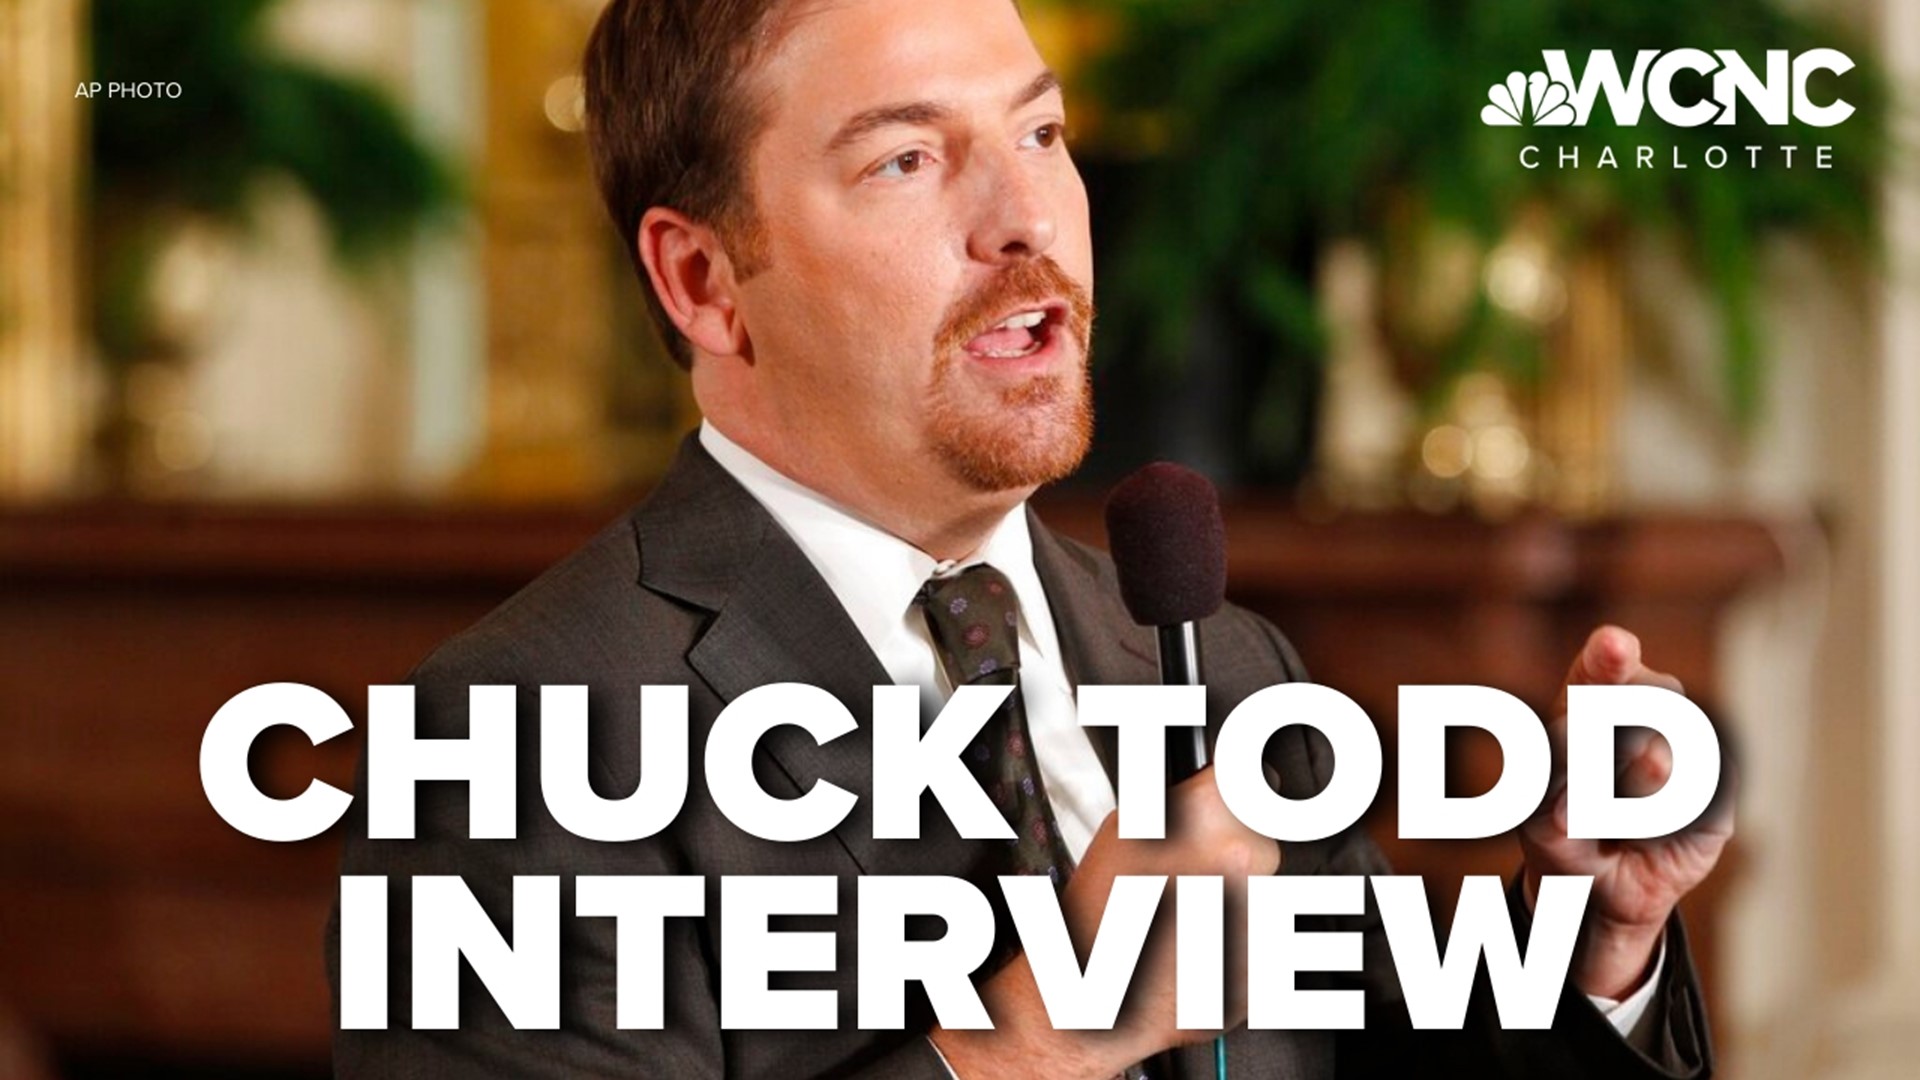 NBC moderator, Chuck Todd, joins WCNC Charlotte to discuss President Biden and unemployment.